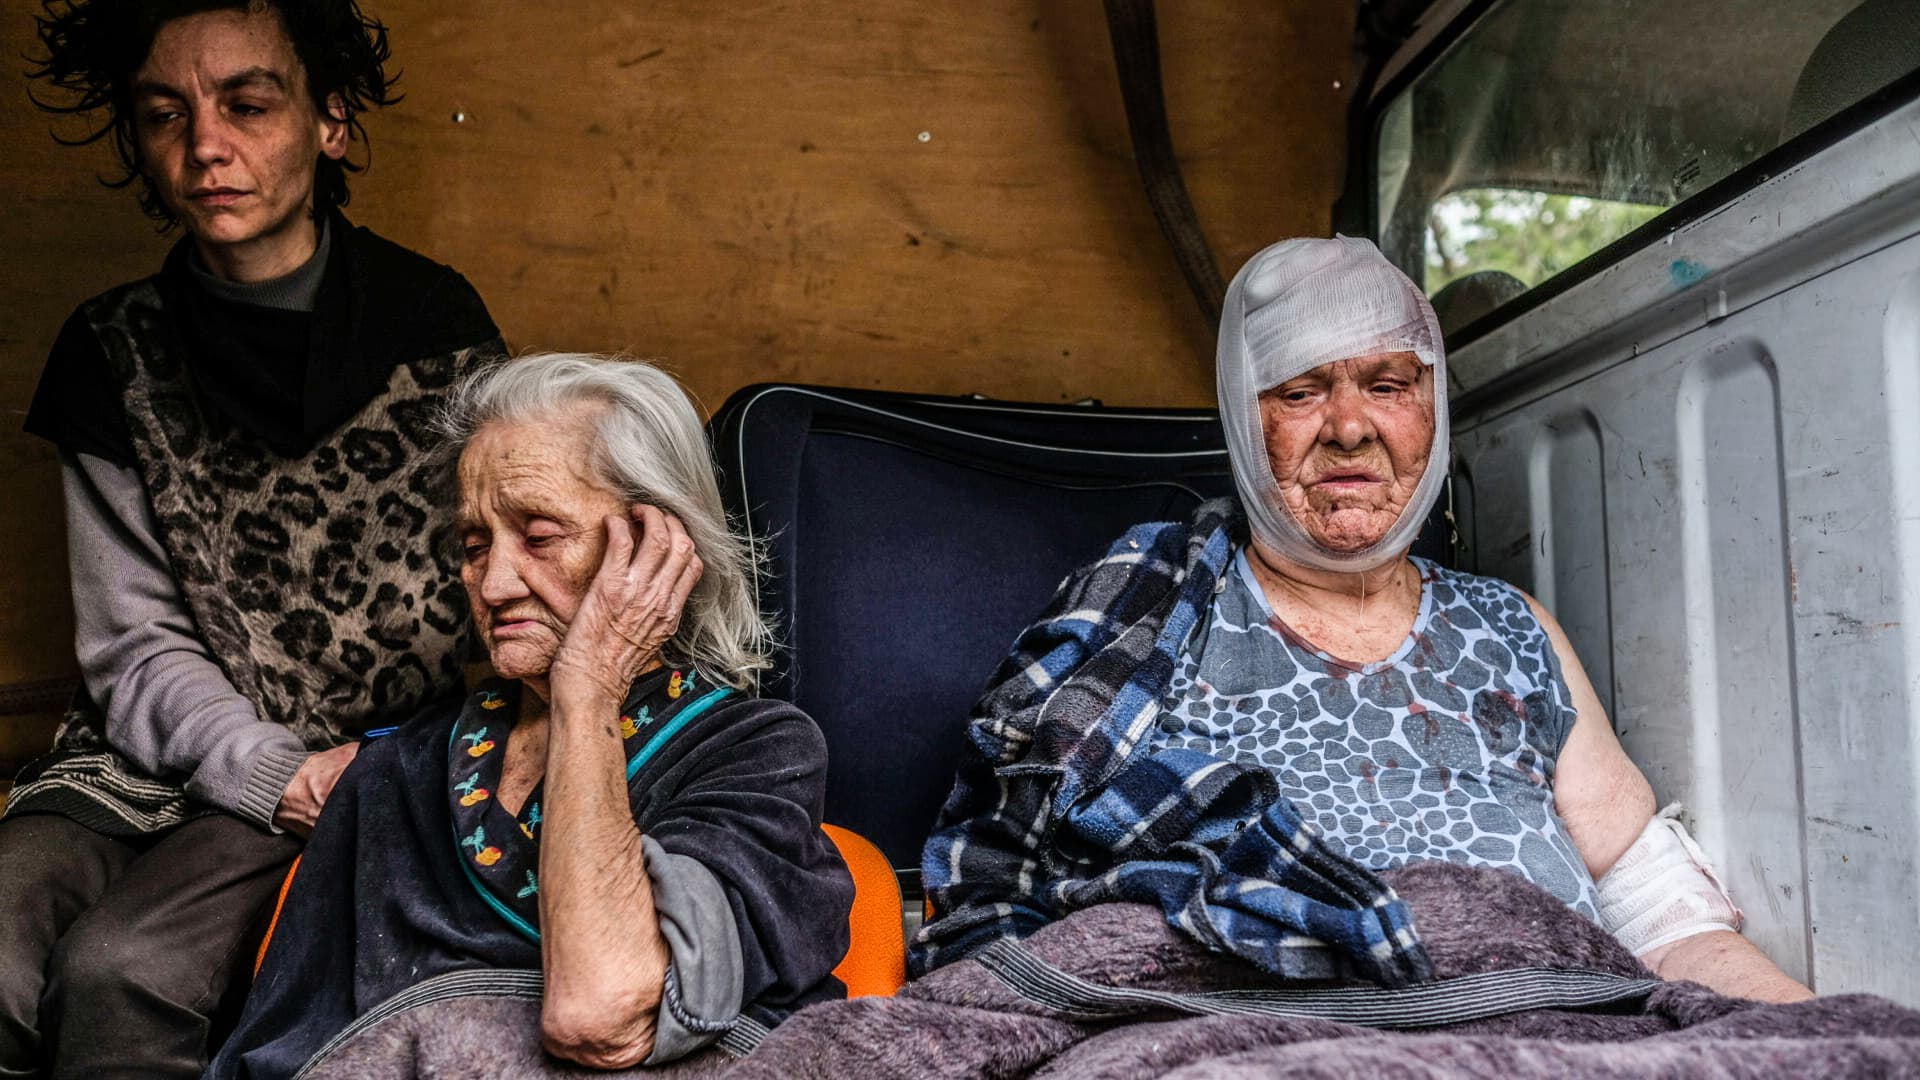 People from Severodonetsk are seen on a van that will take them to Kramatorsk. Severodonetsk, the largest city under Ukrainian control in Luhansk province, has come under intense artillery and missile strikes from the Russian army.